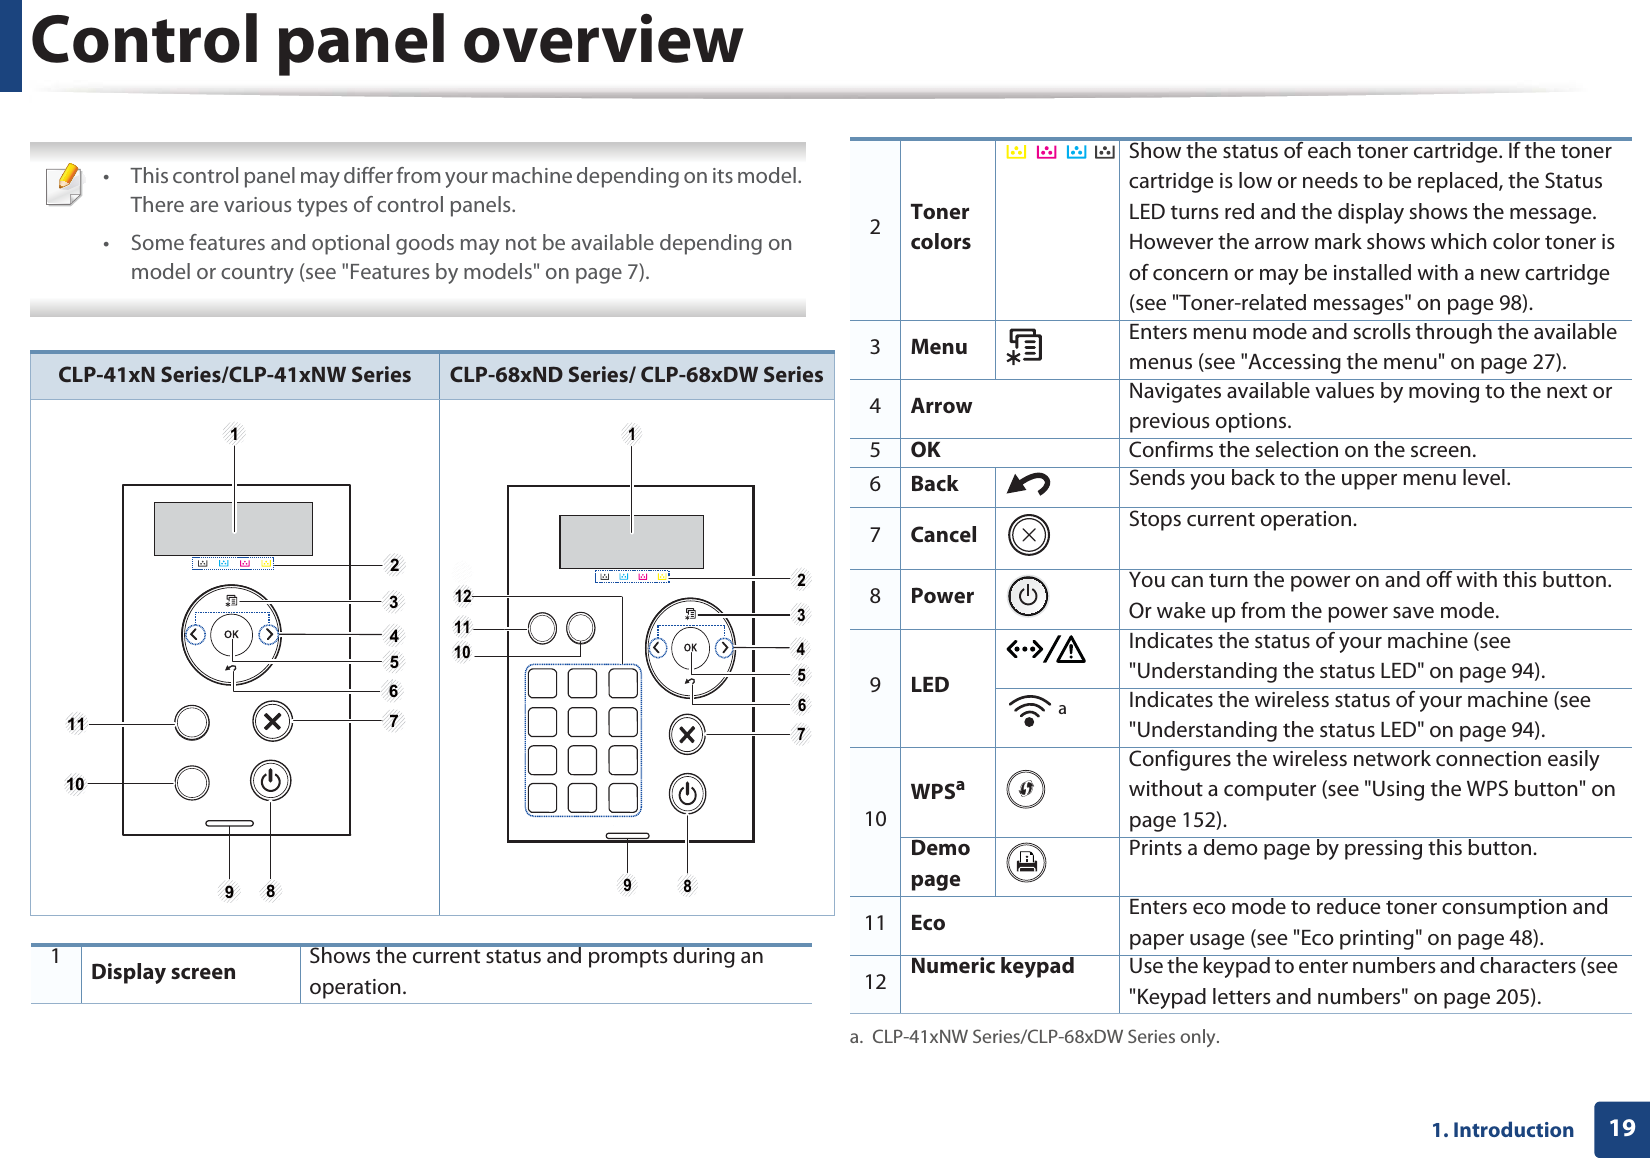 191. IntroductionControl panel overview • This control panel may differ from your machine depending on its model. There are various types of control panels.• Some features and optional goods may not be available depending on model or country (see &quot;Features by models&quot; on page 7). CLP-41xN Series/CLP-41xNW Series CLP-68xND Series/ CLP-68xDW Series1Display screen Shows the current status and prompts during an operation. 28910476511313478911121065212Toner colorsShow the status of each toner cartridge. If the toner cartridge is low or needs to be replaced, the Status LED turns red and the display shows the message. However the arrow mark shows which color toner is of concern or may be installed with a new cartridge (see &quot;Toner-related messages&quot; on page 98).3Menu  Enters menu mode and scrolls through the available menus (see &quot;Accessing the menu&quot; on page 27).4Arrow Navigates available values by moving to the next or previous options.5OK Confirms the selection on the screen. 6Back  Sends you back to the upper menu level.7Cancel Stops current operation.8Power You can turn the power on and off with this button. Or wake up from the power save mode.9LEDIndicates the status of your machine (see &quot;Understanding the status LED&quot; on page 94). aIndicates the wireless status of your machine (see &quot;Understanding the status LED&quot; on page 94). 10WPSaConfigures the wireless network connection easily without a computer (see &quot;Using the WPS button&quot; on page 152).Demo pagePrints a demo page by pressing this button.11 Eco Enters eco mode to reduce toner consumption and paper usage (see &quot;Eco printing&quot; on page 48).12 Numeric keypad Use the keypad to enter numbers and characters (see &quot;Keypad letters and numbers&quot; on page 205).a. CLP-41xNW Series/CLP-68xDW Series only.